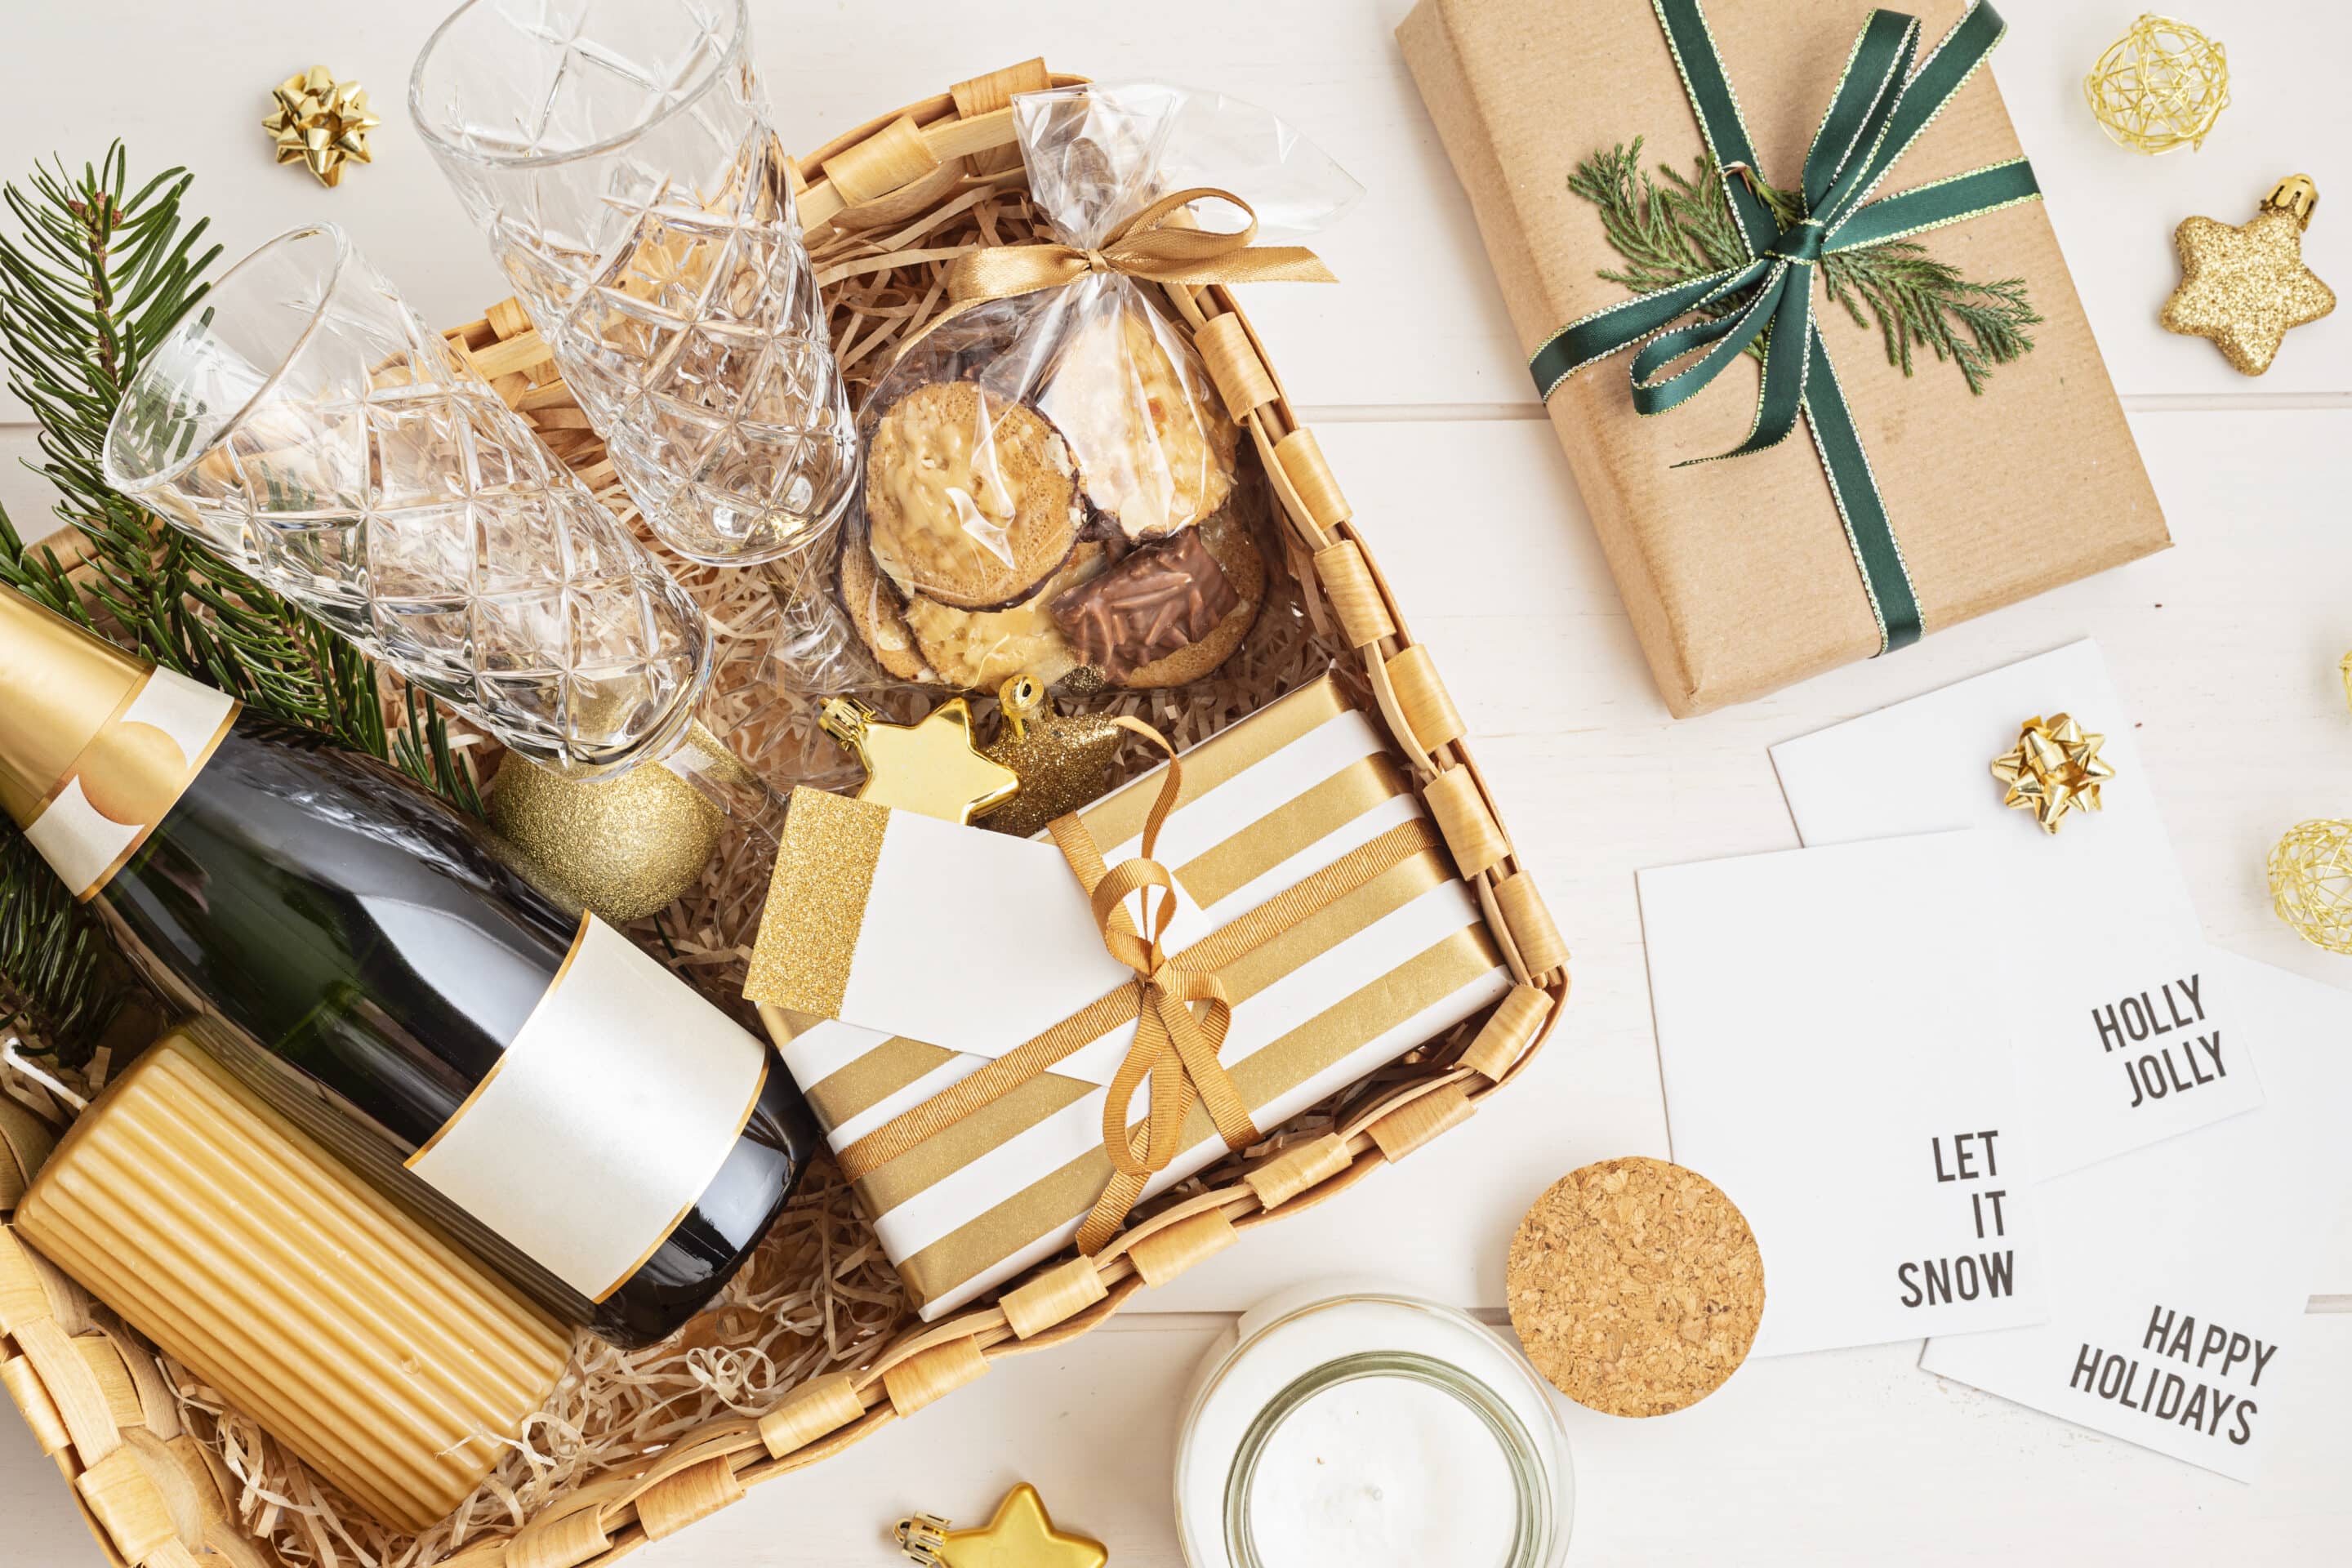 Refined Christmas gift basket for romantic holidays with bottle of champagne, wine glasses